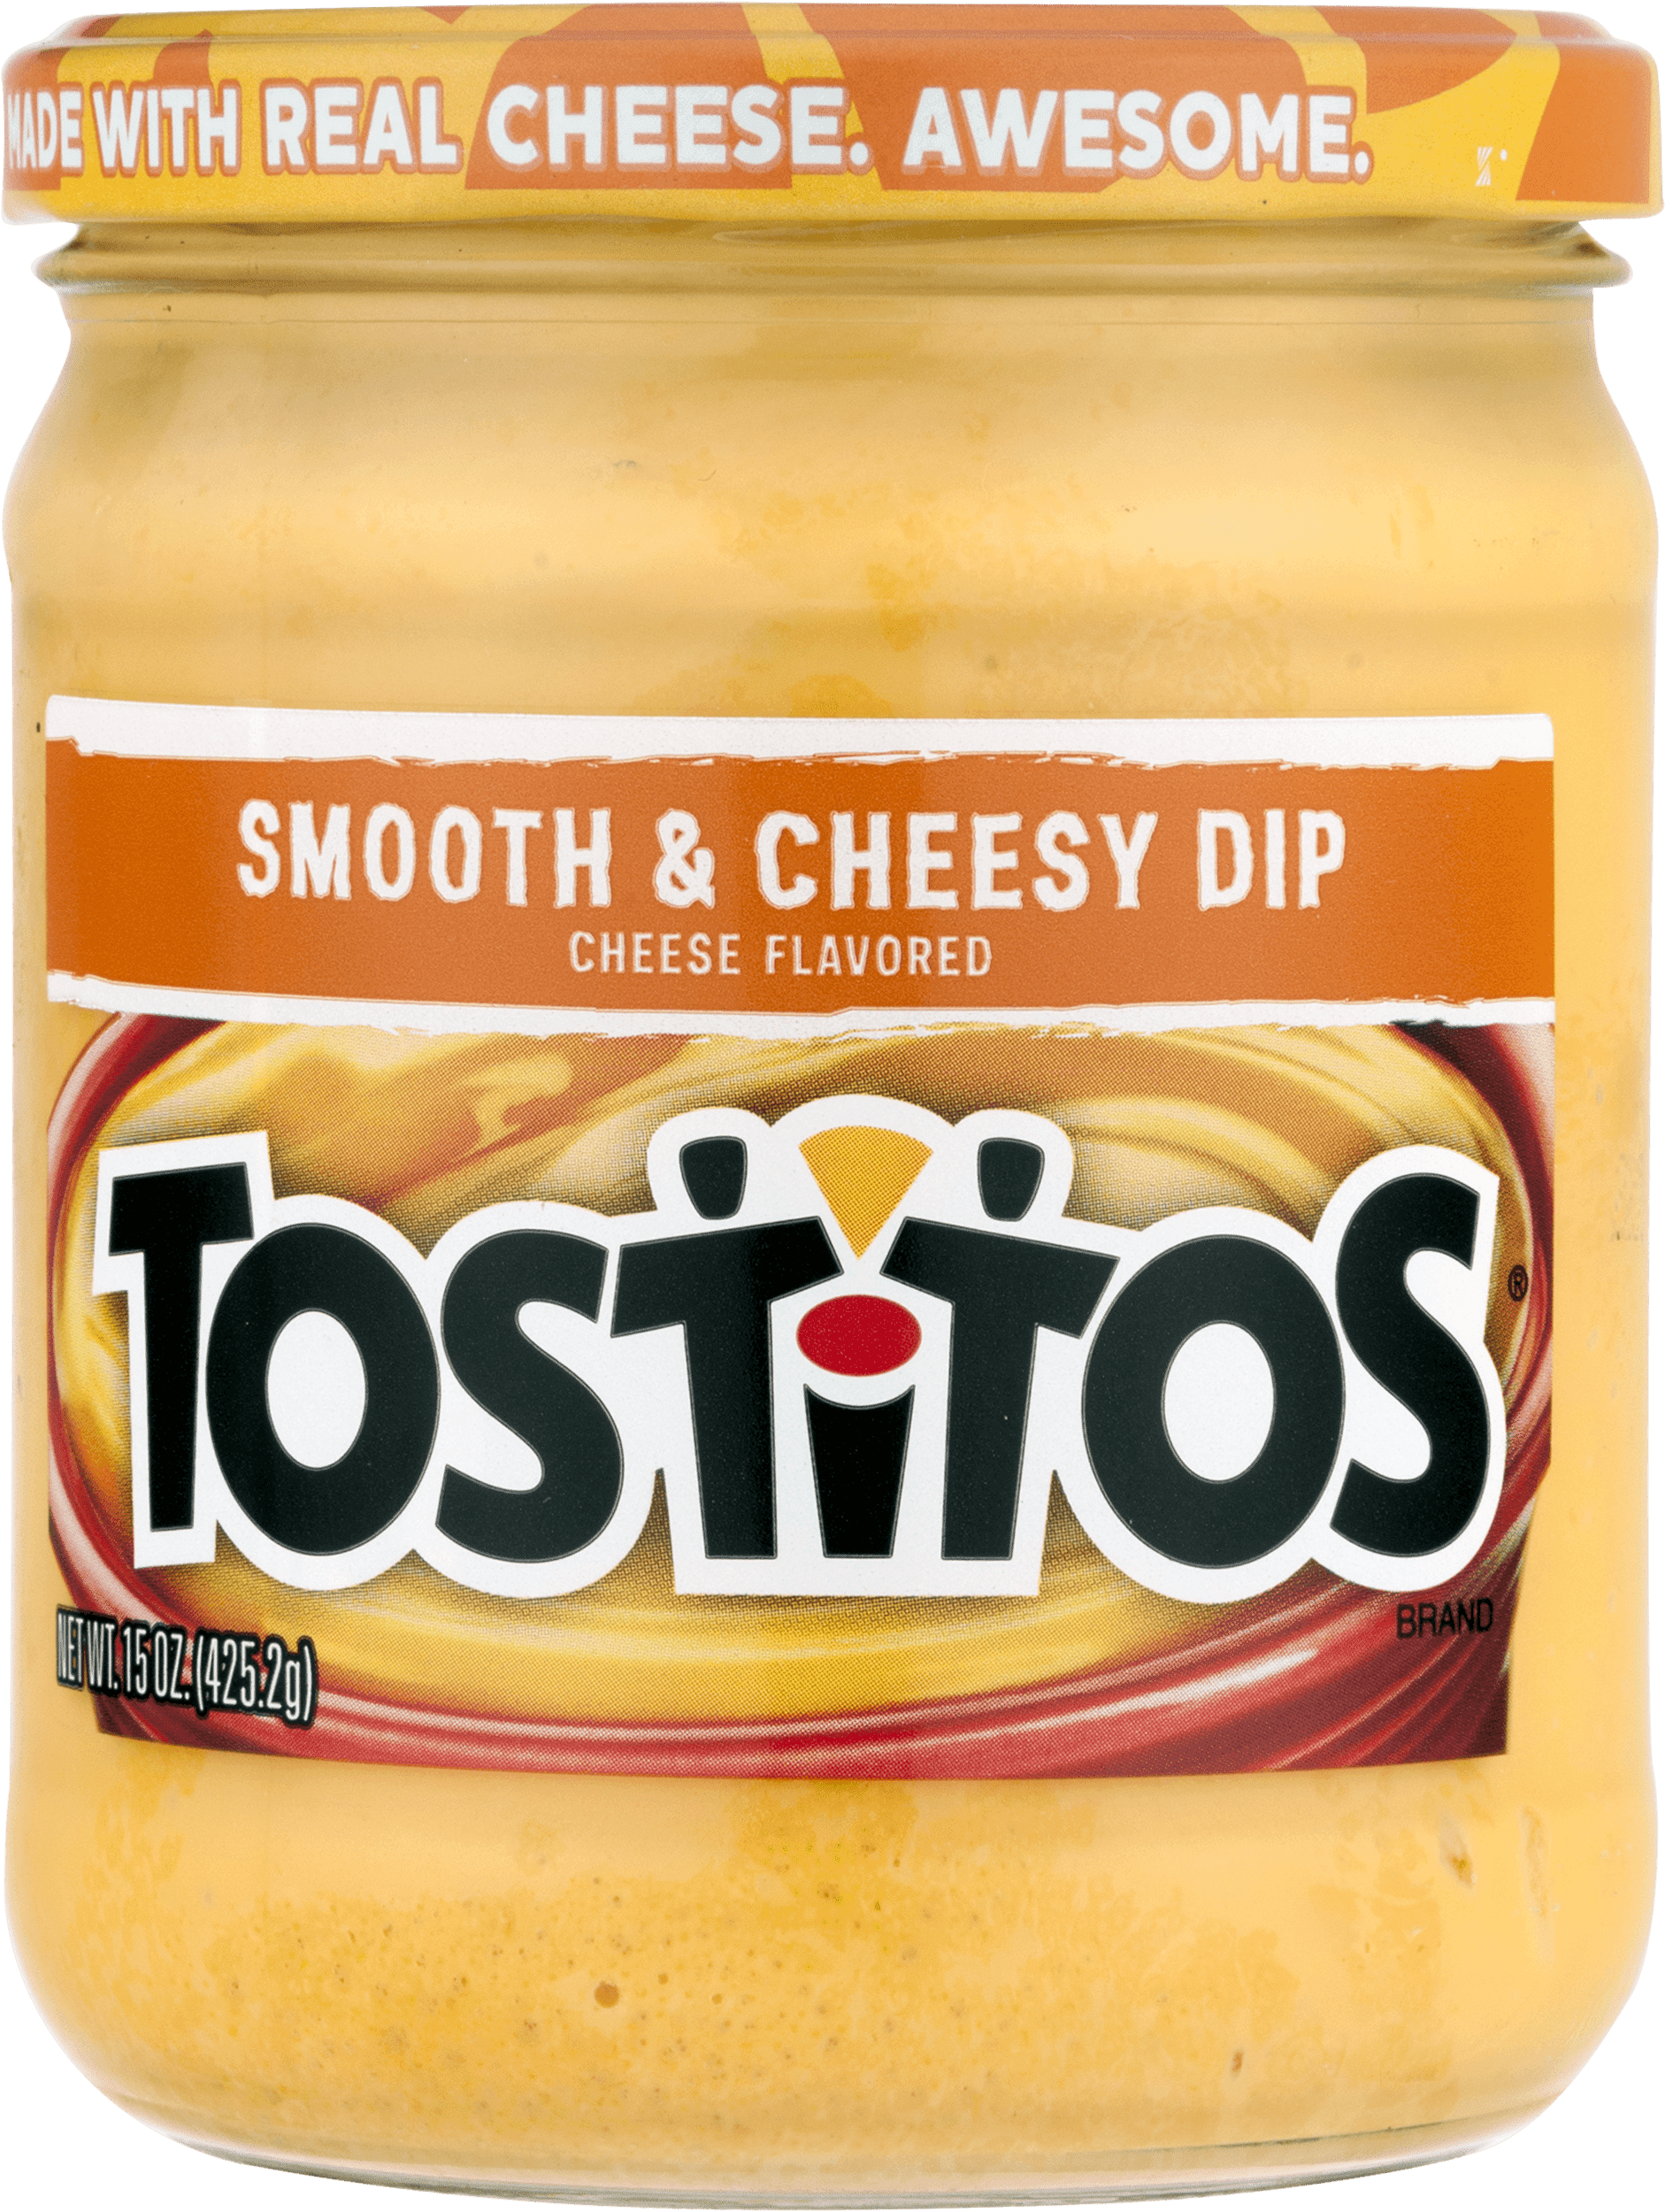 Tostitos dip expiration date format How Long Is Dip Good For After Opening